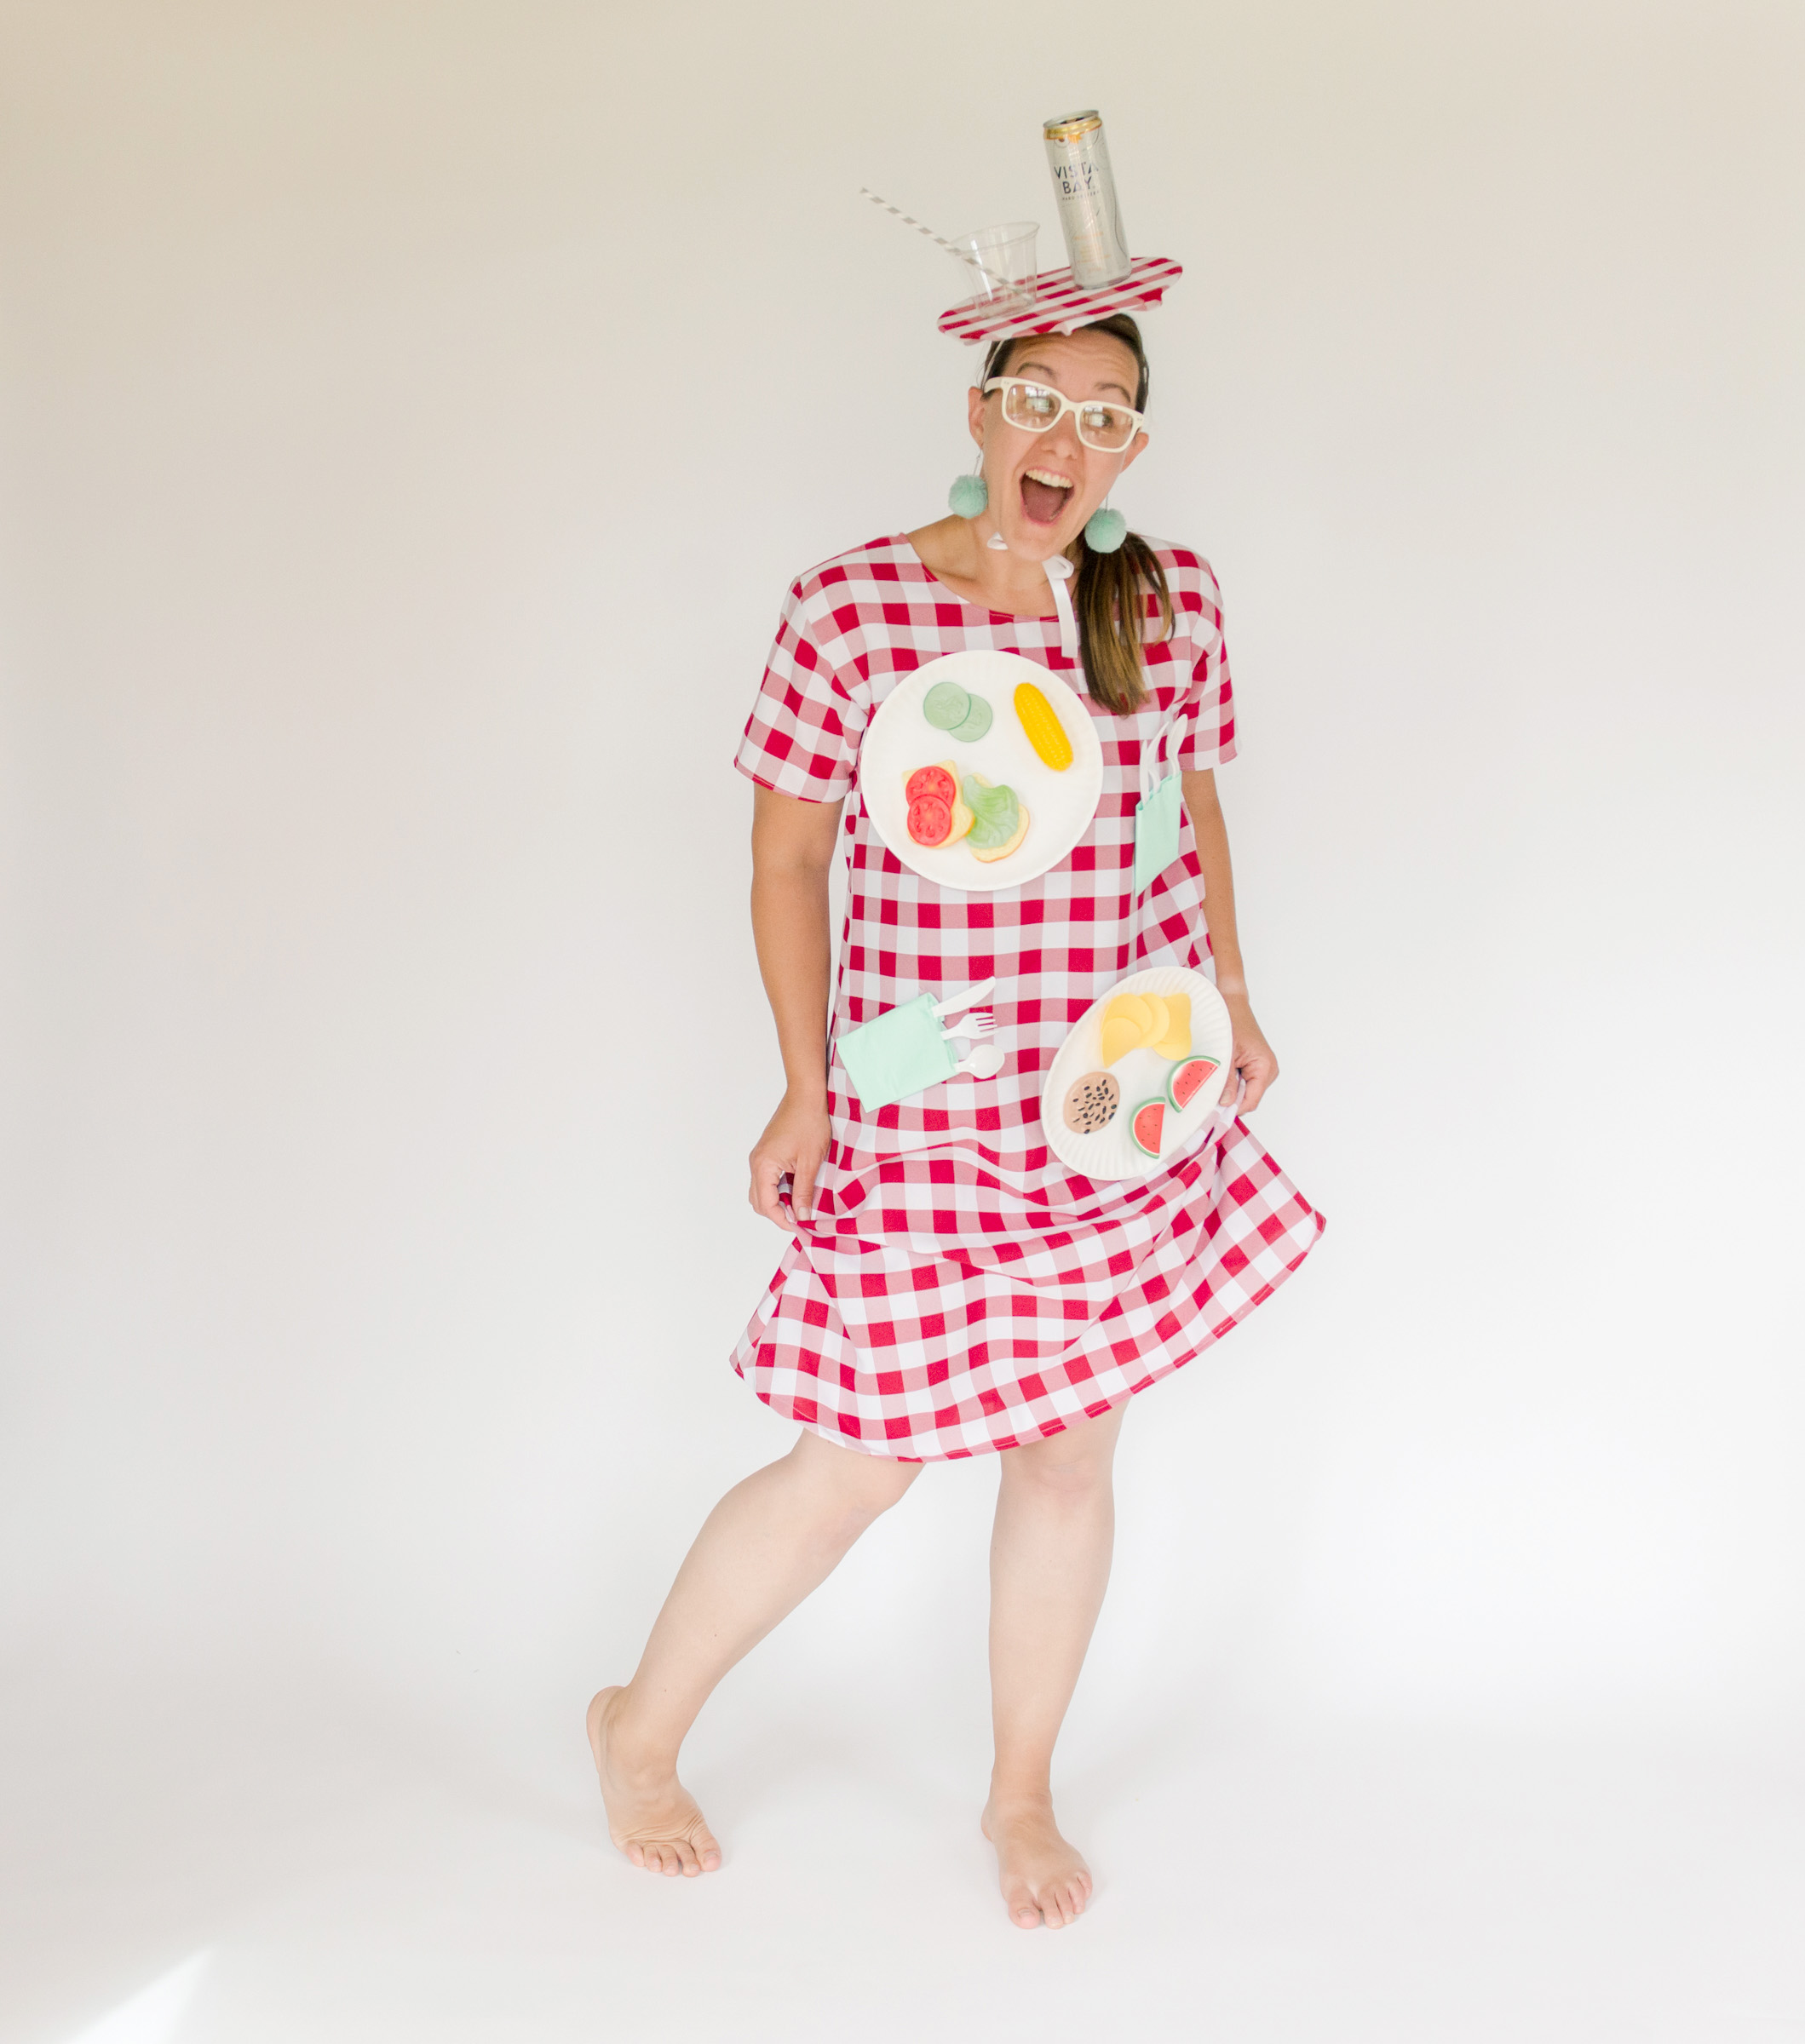 How to make a DIY picnic table costume with fake food and a table cloth